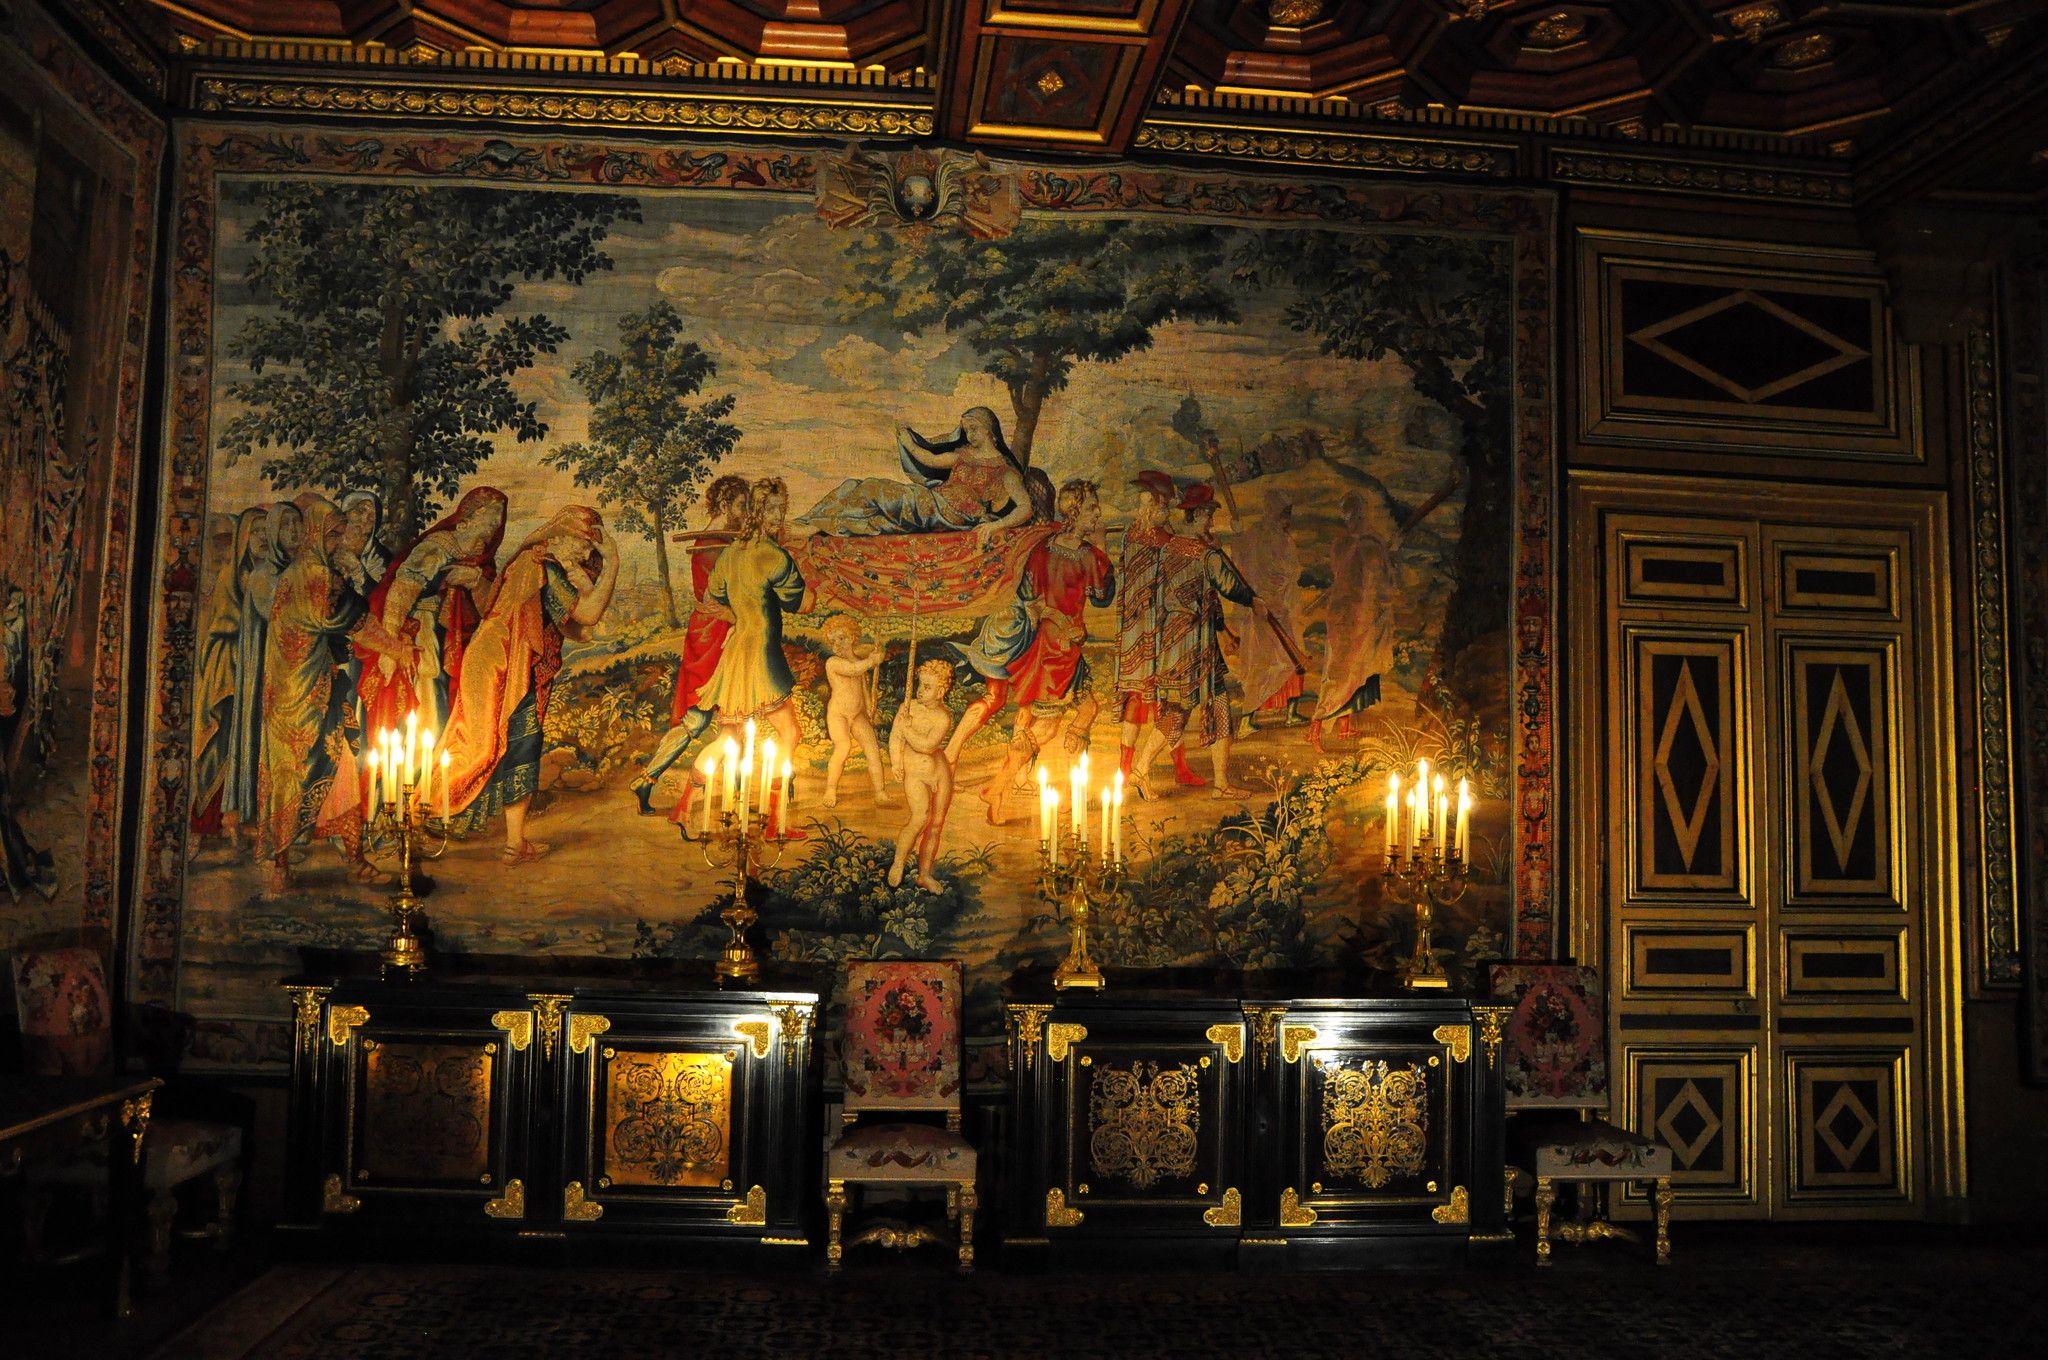 A medieval tapestry in a darkened ornate room. The only light comes from four candelabras in front of it, catching the gilt surfaces of all the framing of the room and furniture.